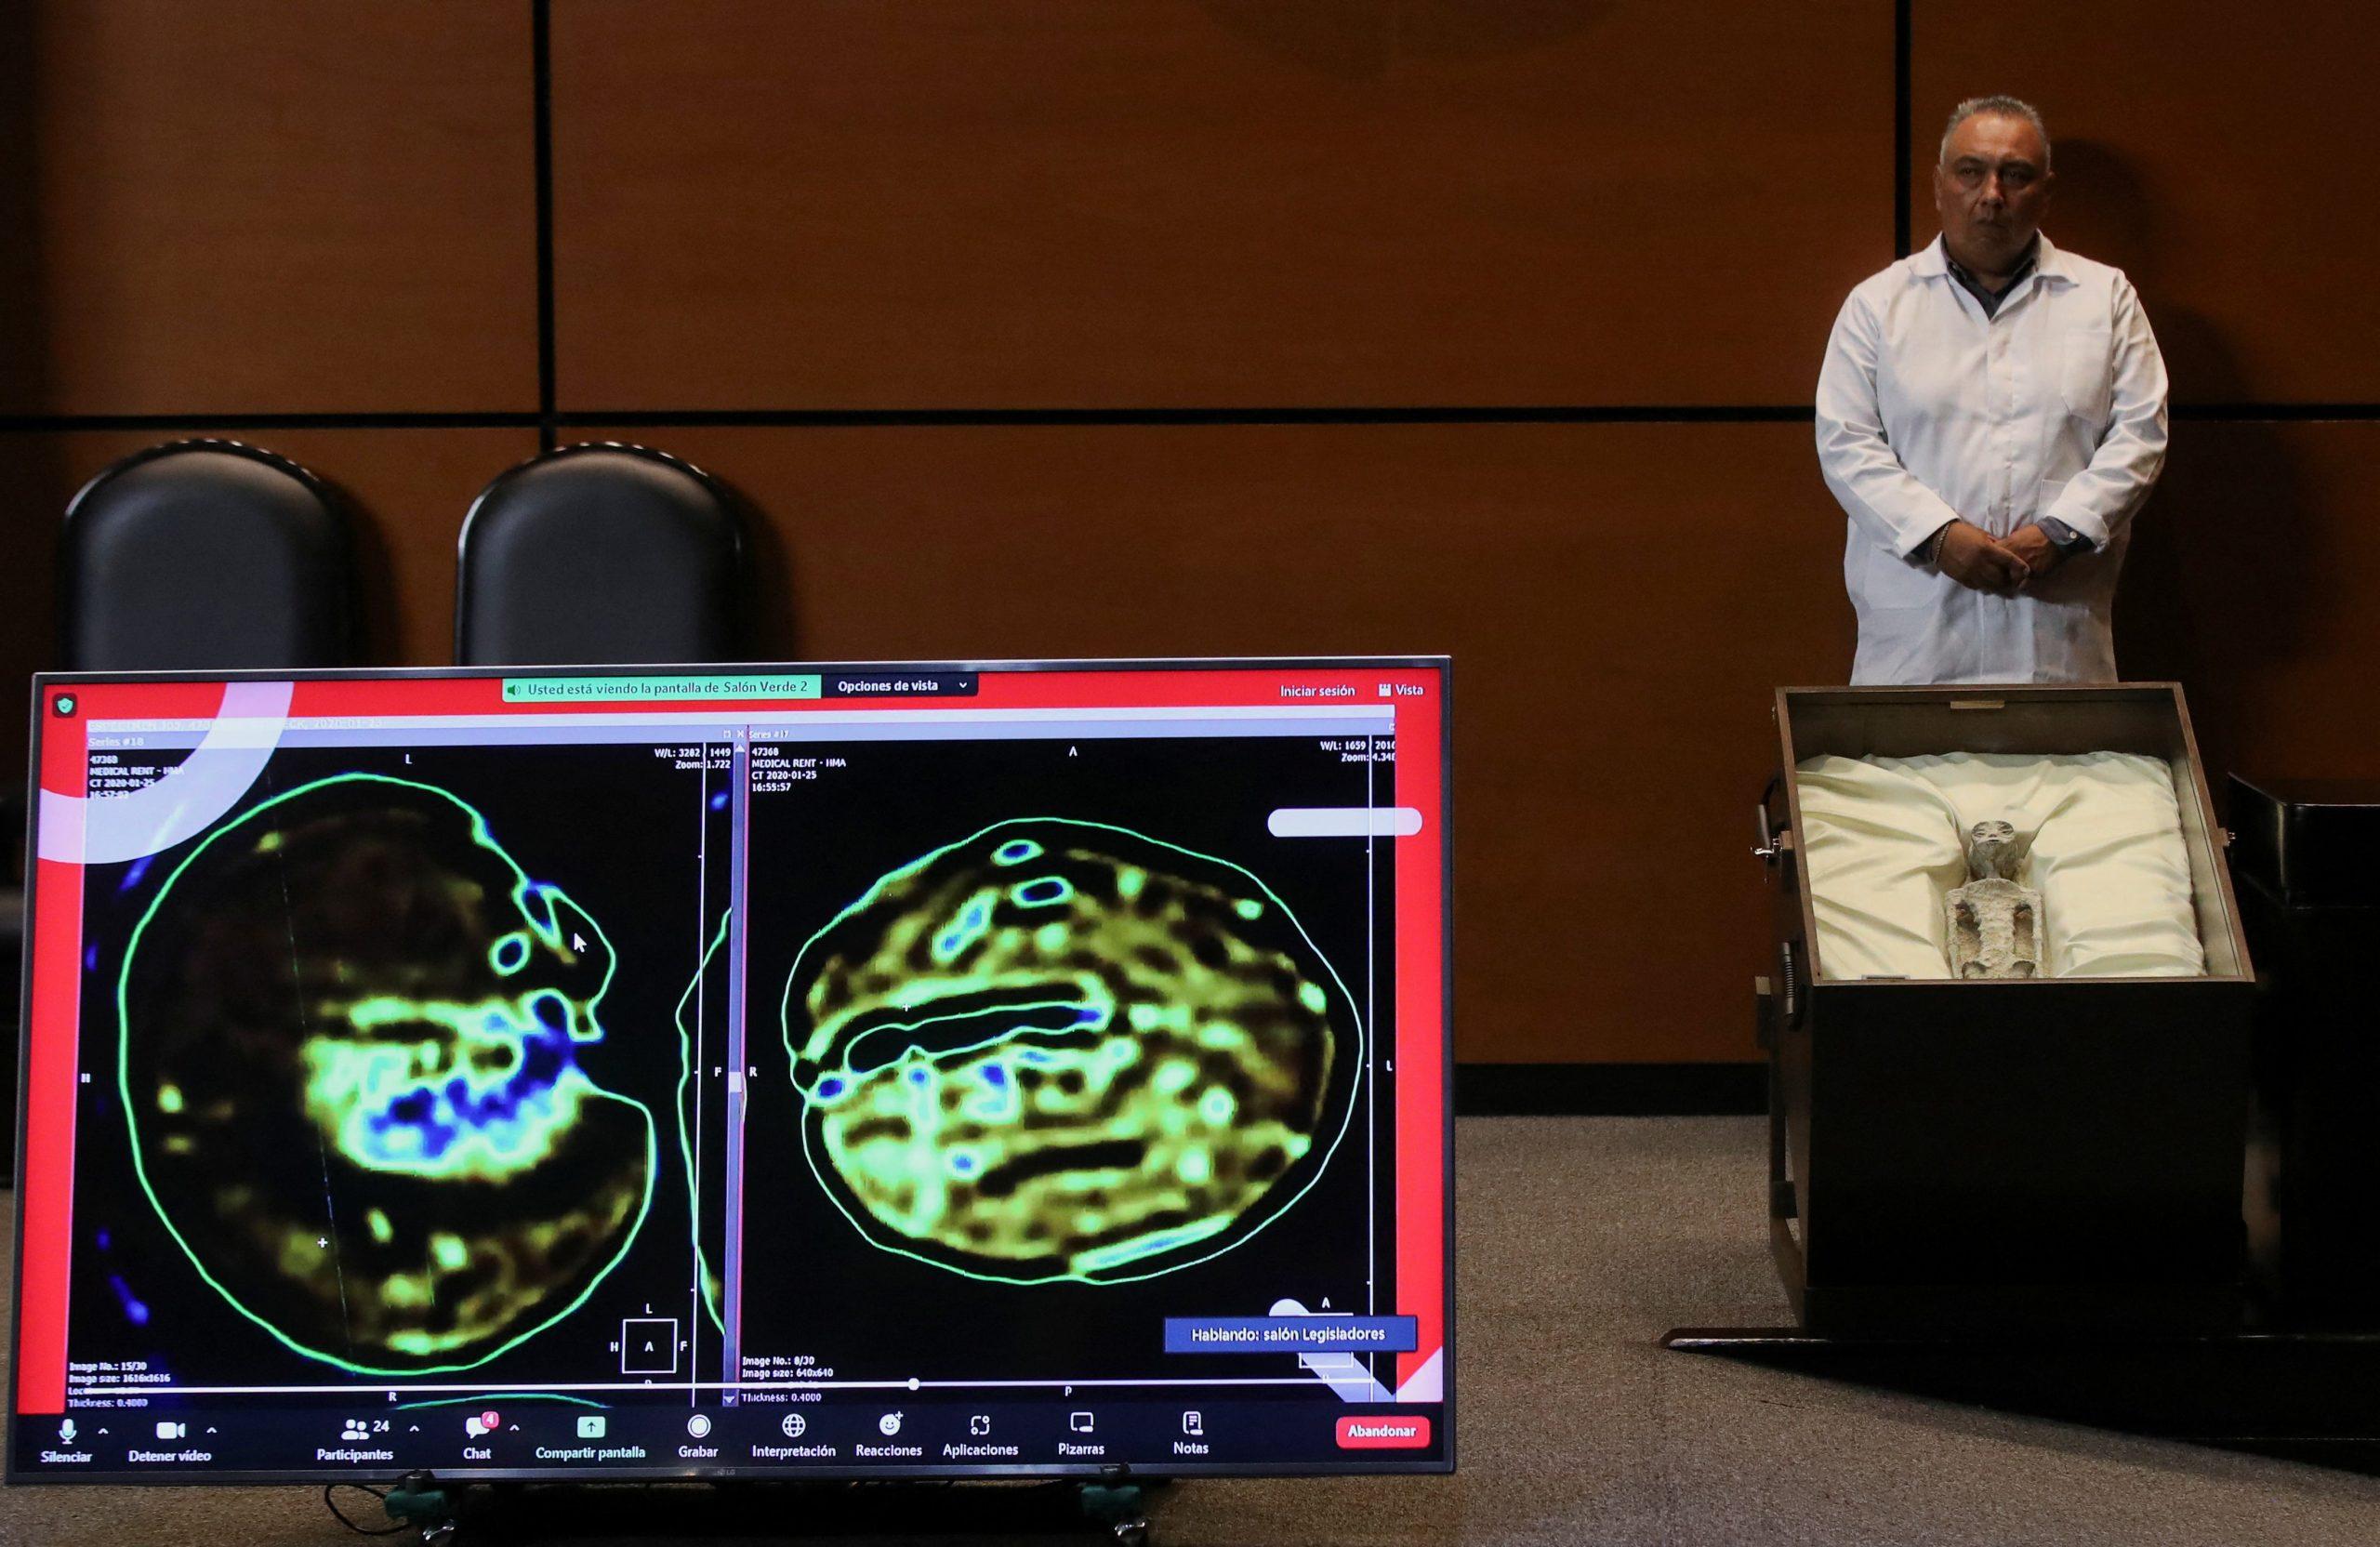 </p>
<p>X-rays of the specimens were also shown during the hearing, with experts testifying under oath that one of the bodies is seen to have “eggs” inside</p>
<p>